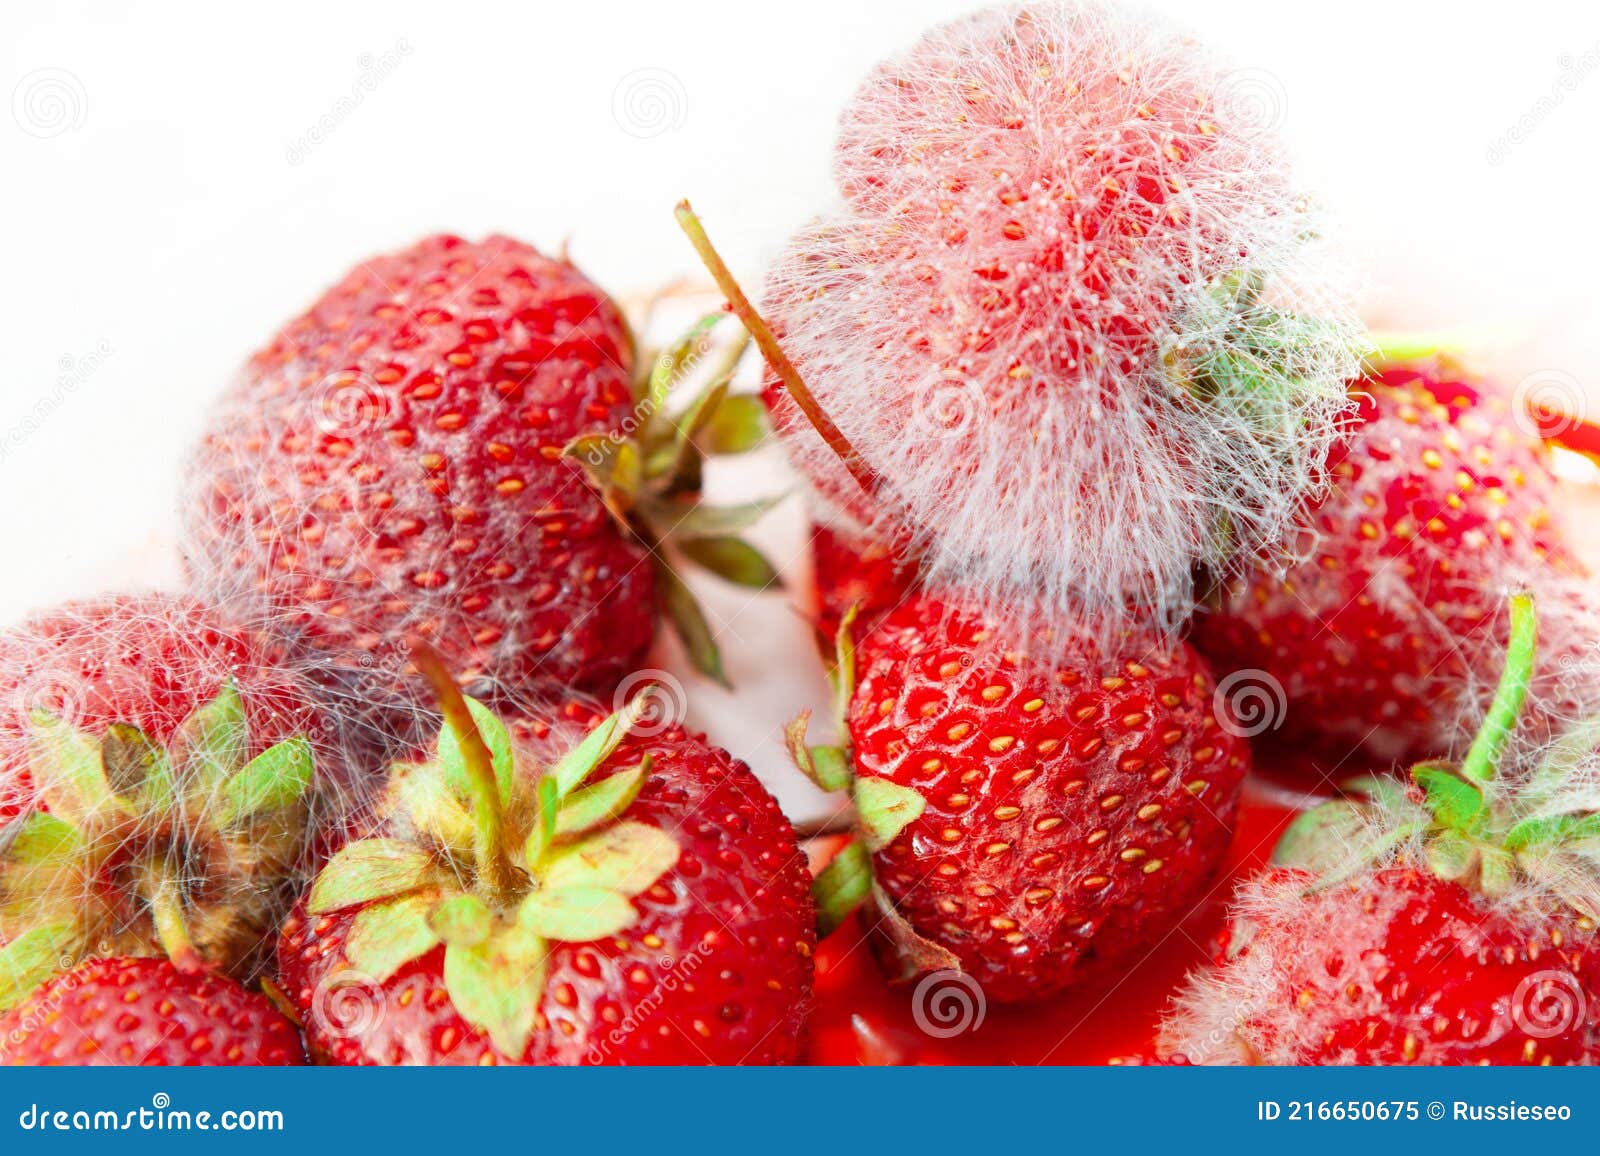 Strawberry with mold stock image. Image of natural, dessert - 216650675